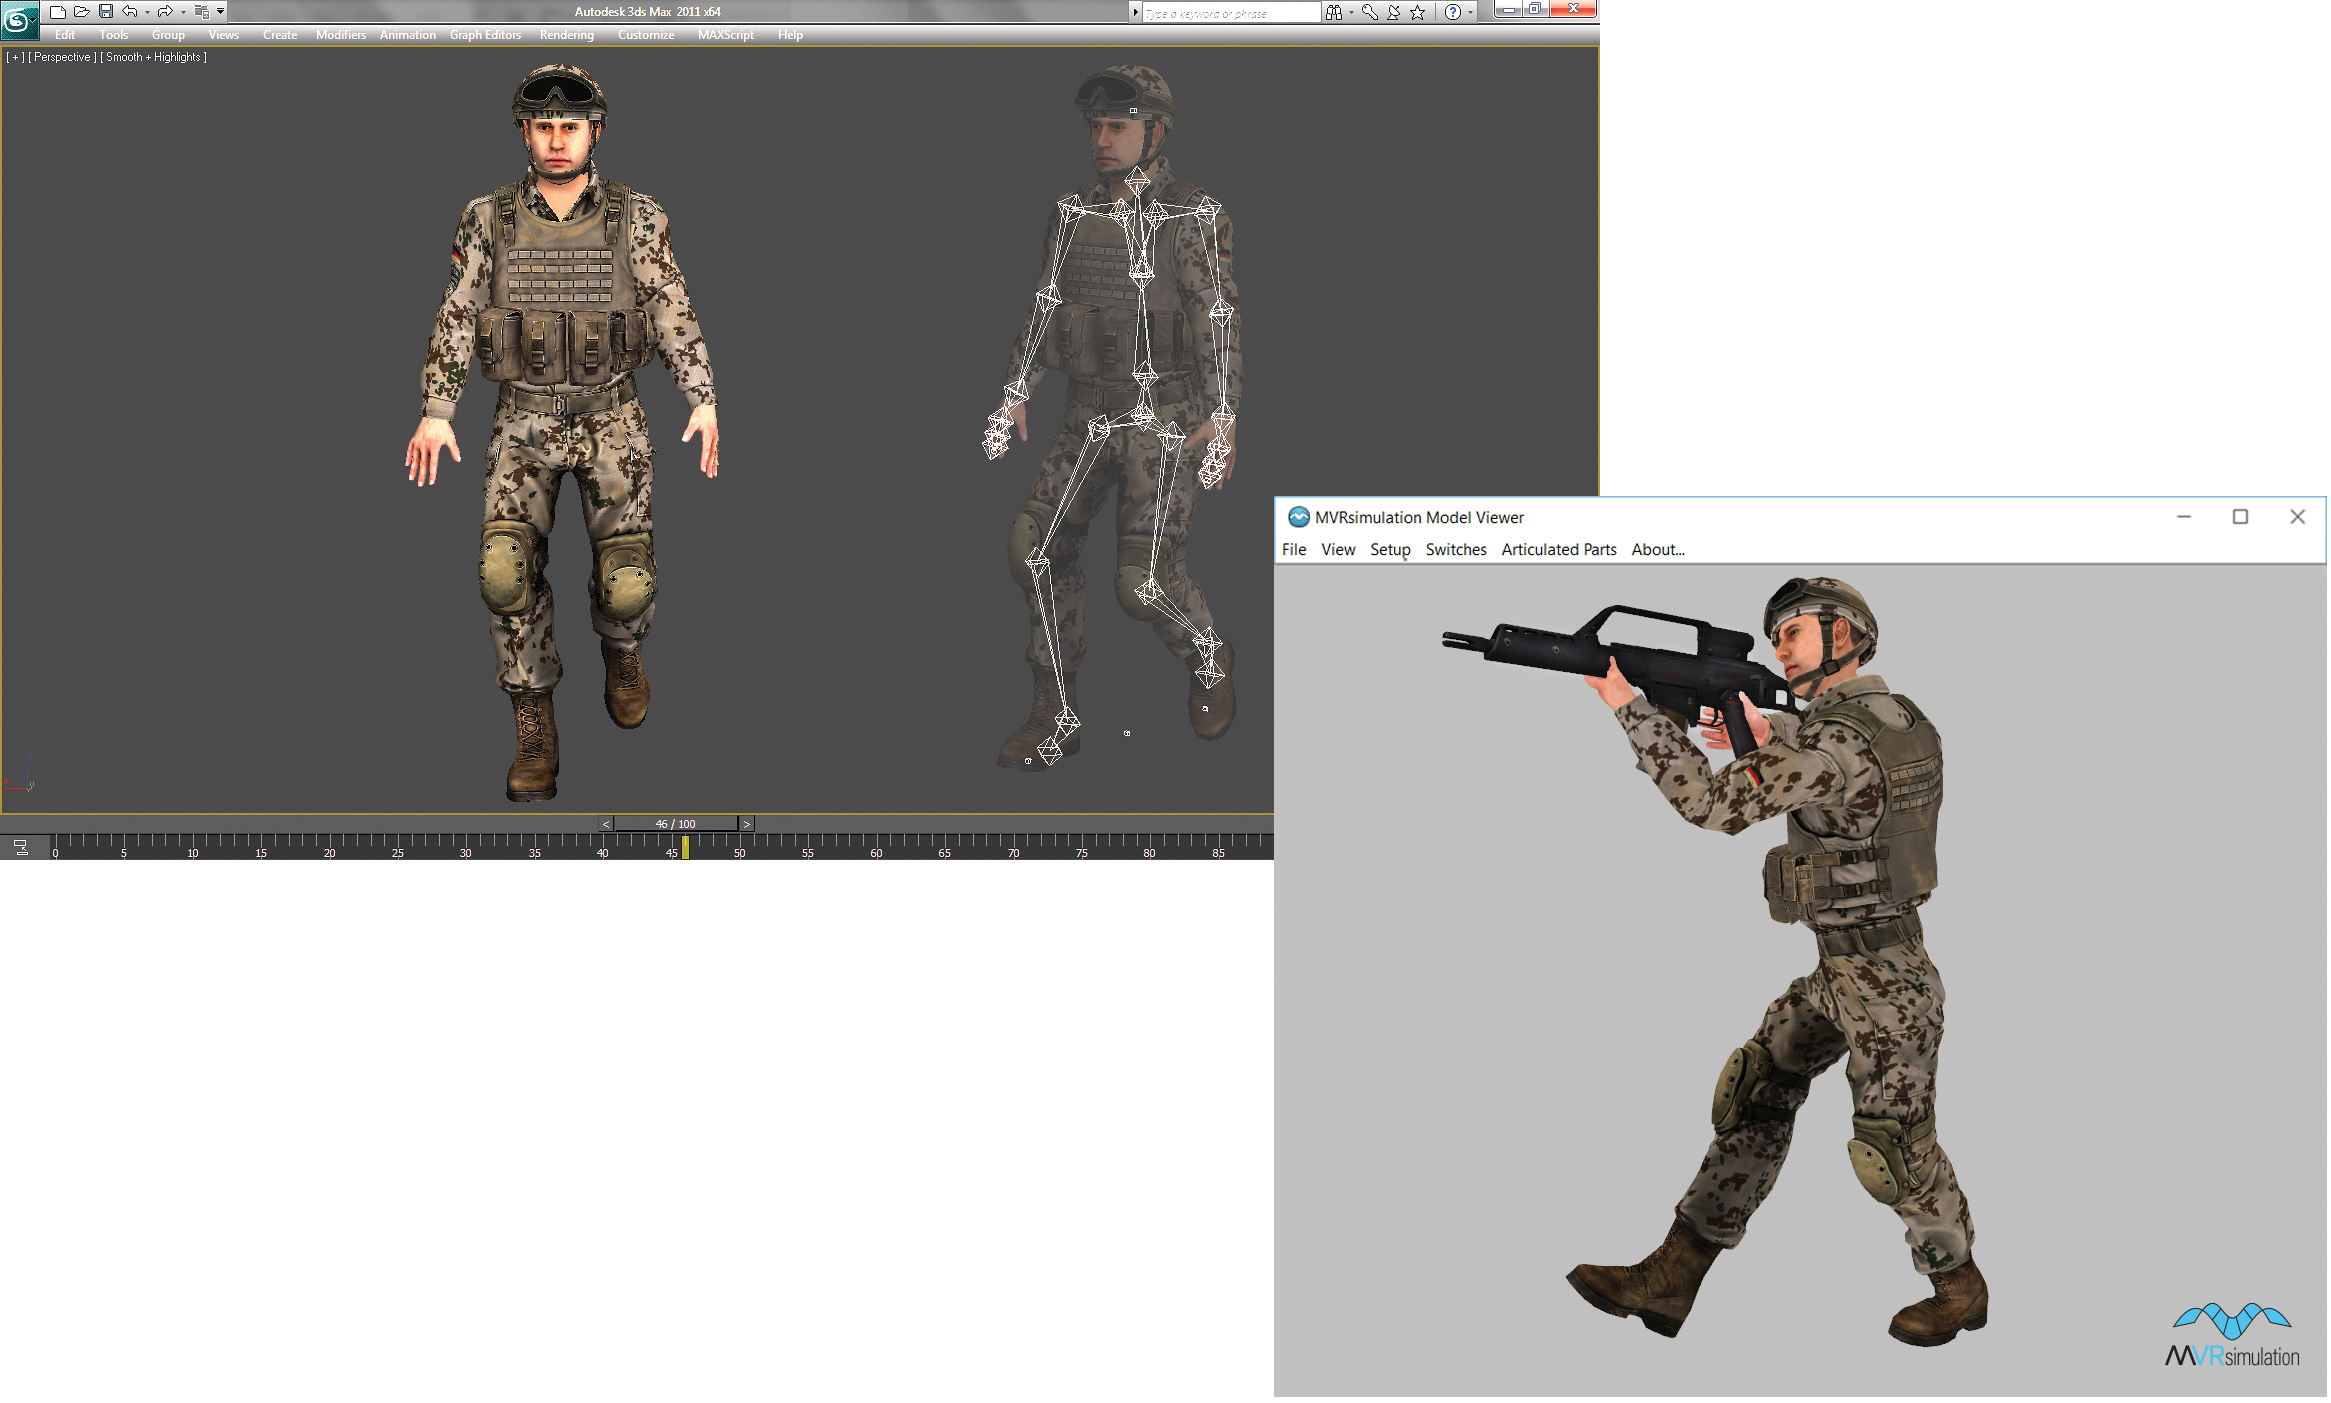 A character model in Autodesk 3ds Max prior to exporting it in FBX format (left), and the resulting model in MetaVR's model format (right), previewed in MetaVR's Model Viewer.